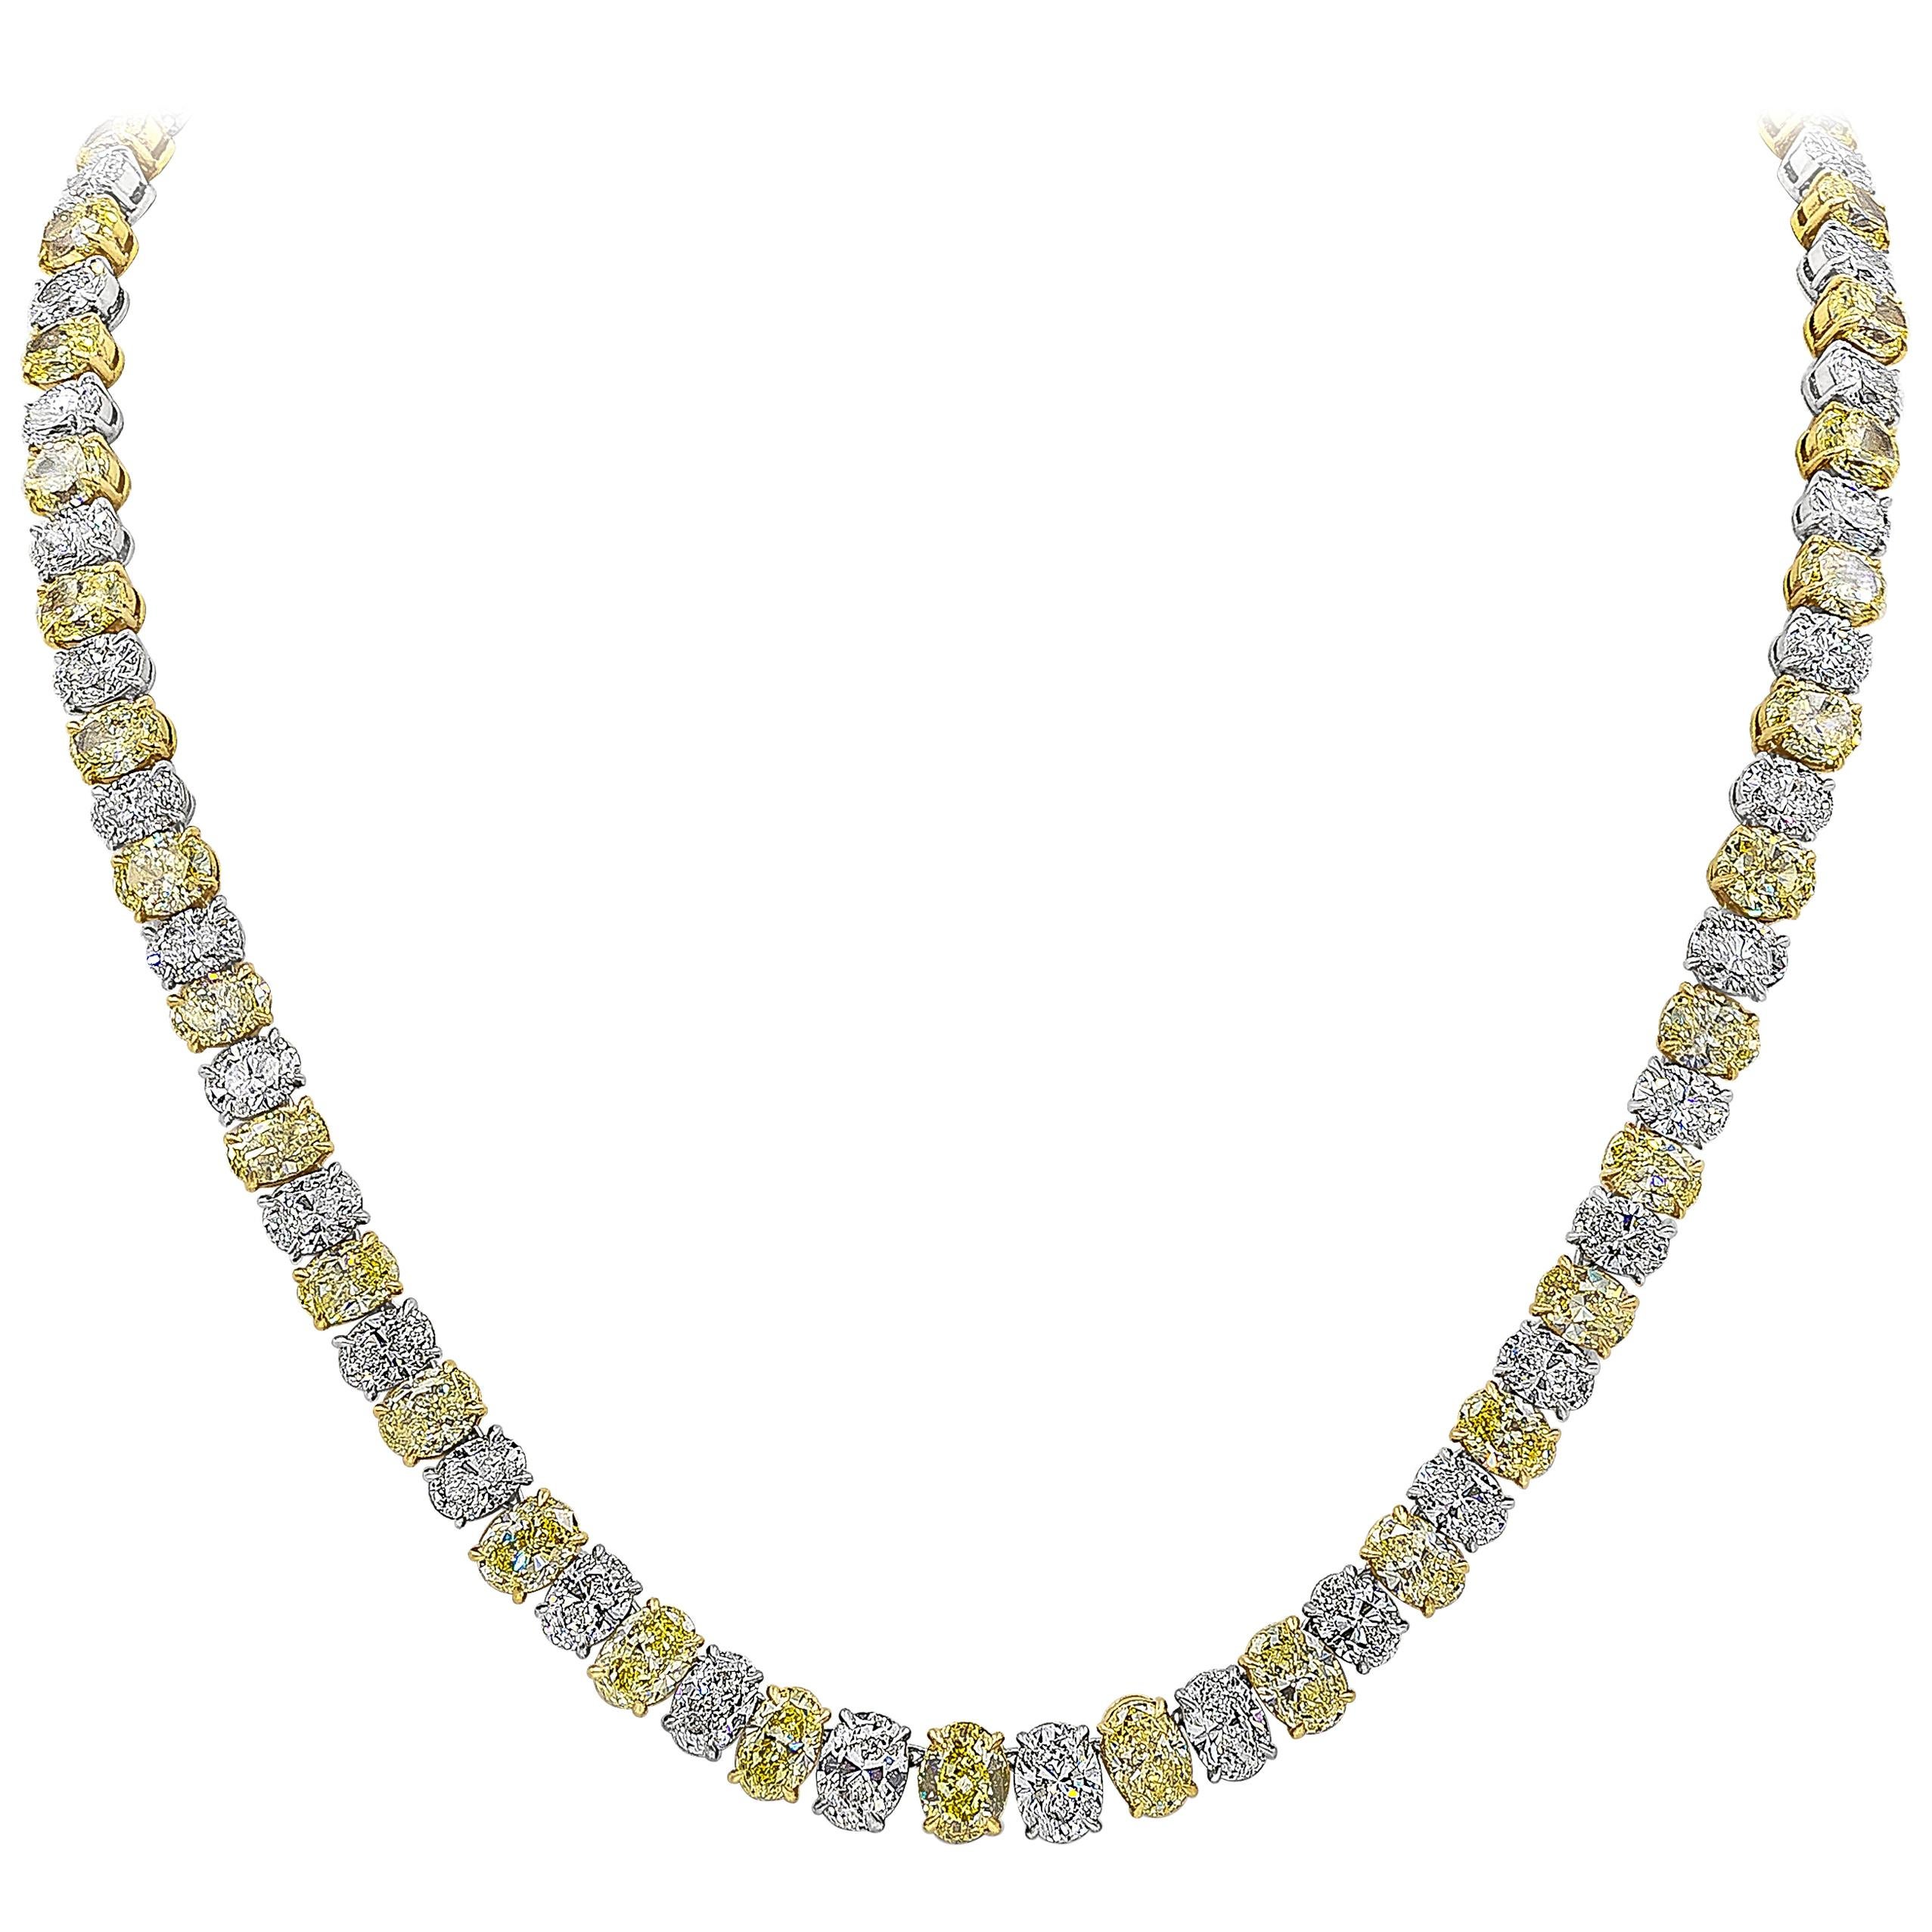 Roman Malakov 54.75 Carat Oval Cut Yellow and White Diamond Tennis Necklace For Sale